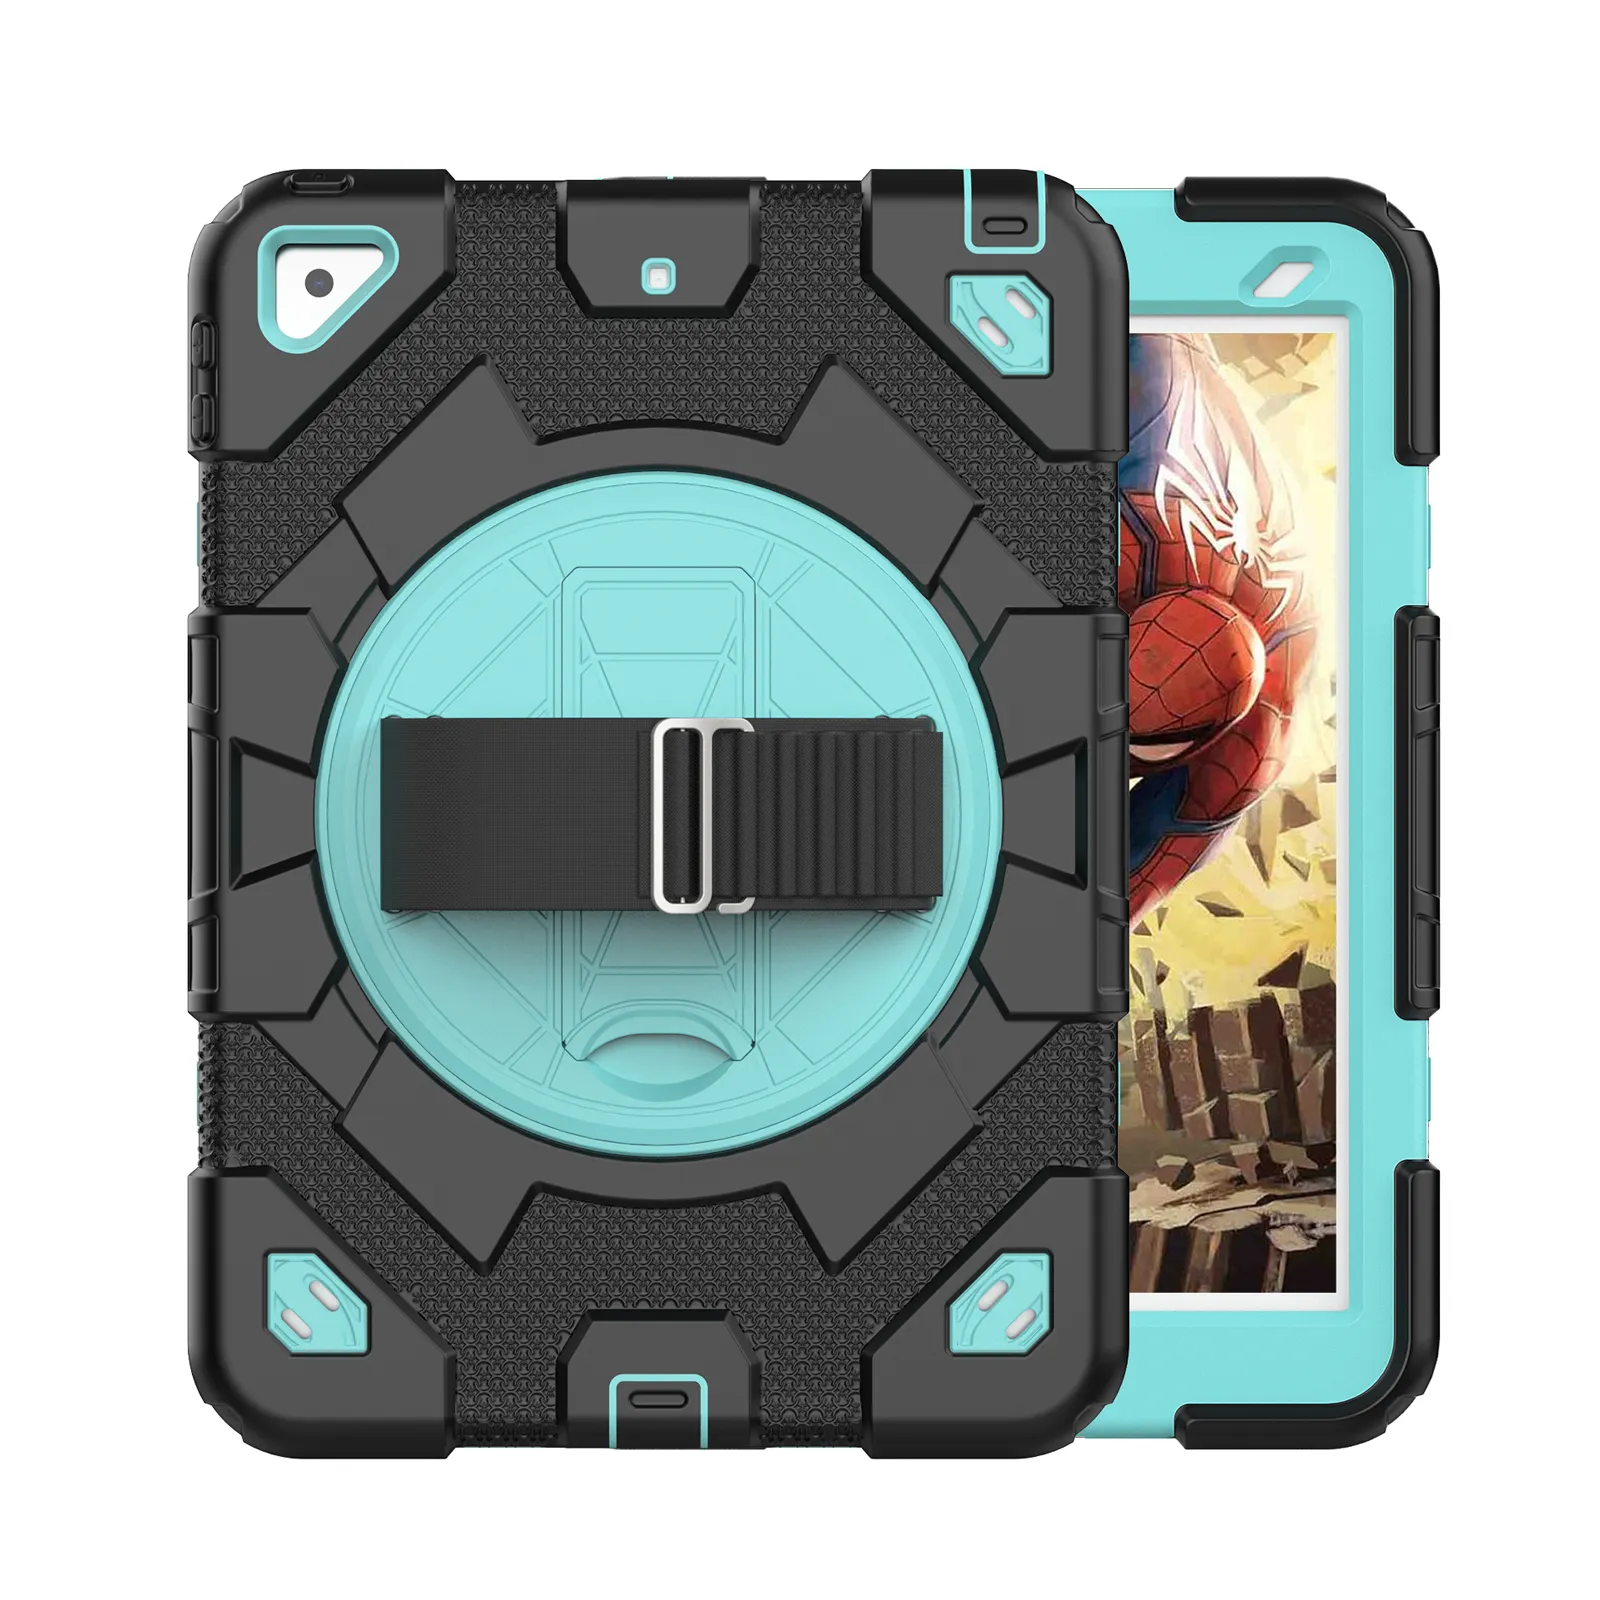 Spider Man Kids Rugged Kickstand Hand Shoulder Stra Tablet Cover for ipad 10/air 3 10.5 inch Tablet Case